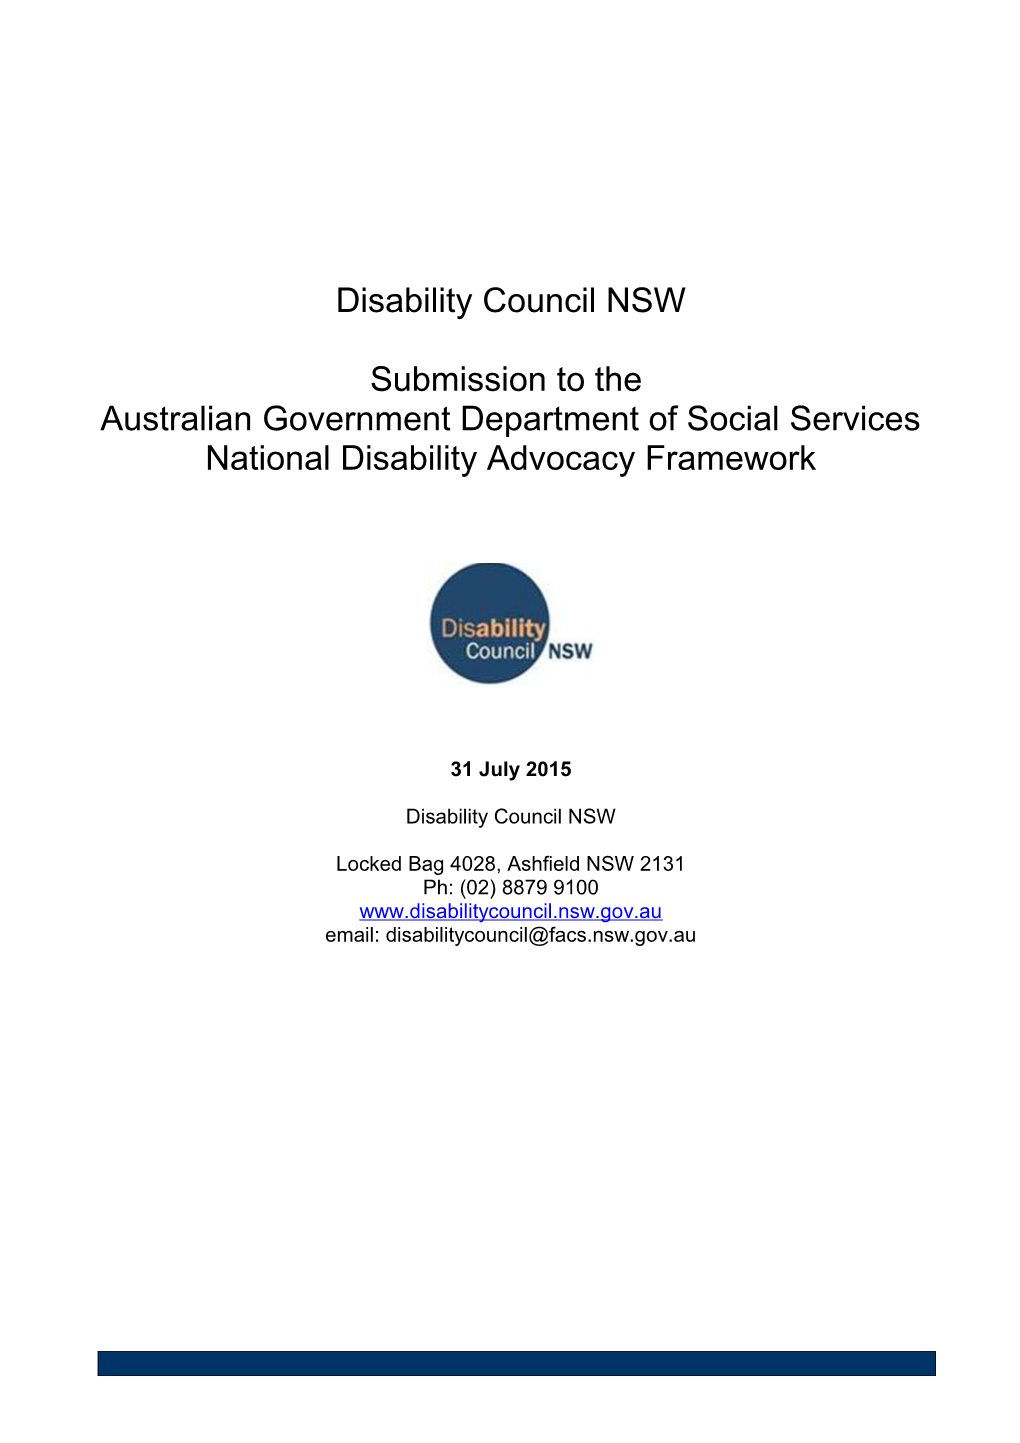 Australian Government Department of Social Services National Disability Advocacy Framework